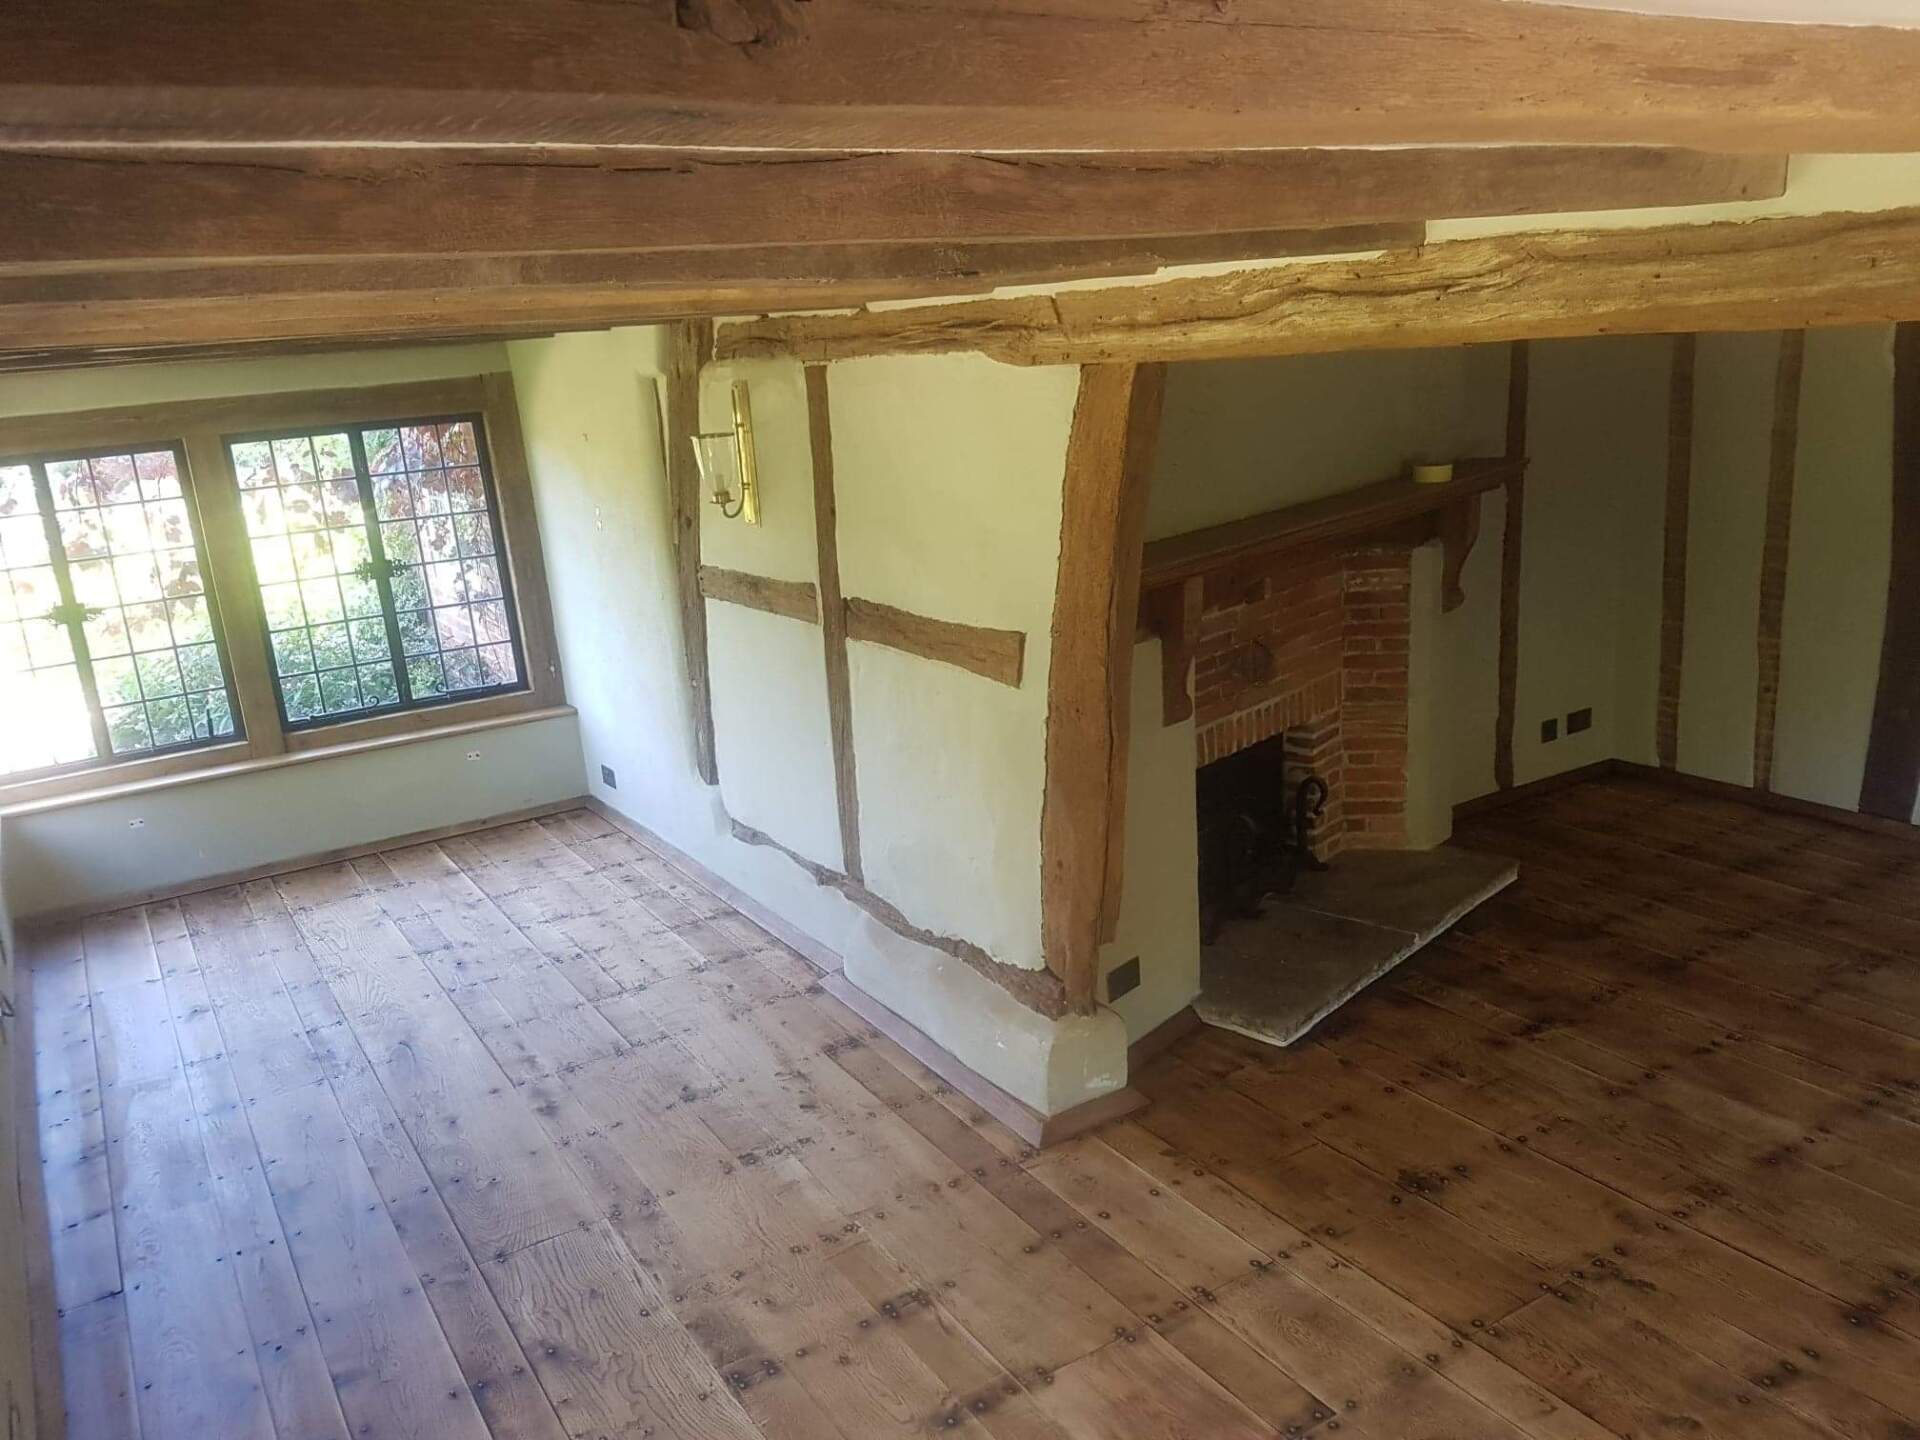 Restored black old original oak floor stained and finished to match beams